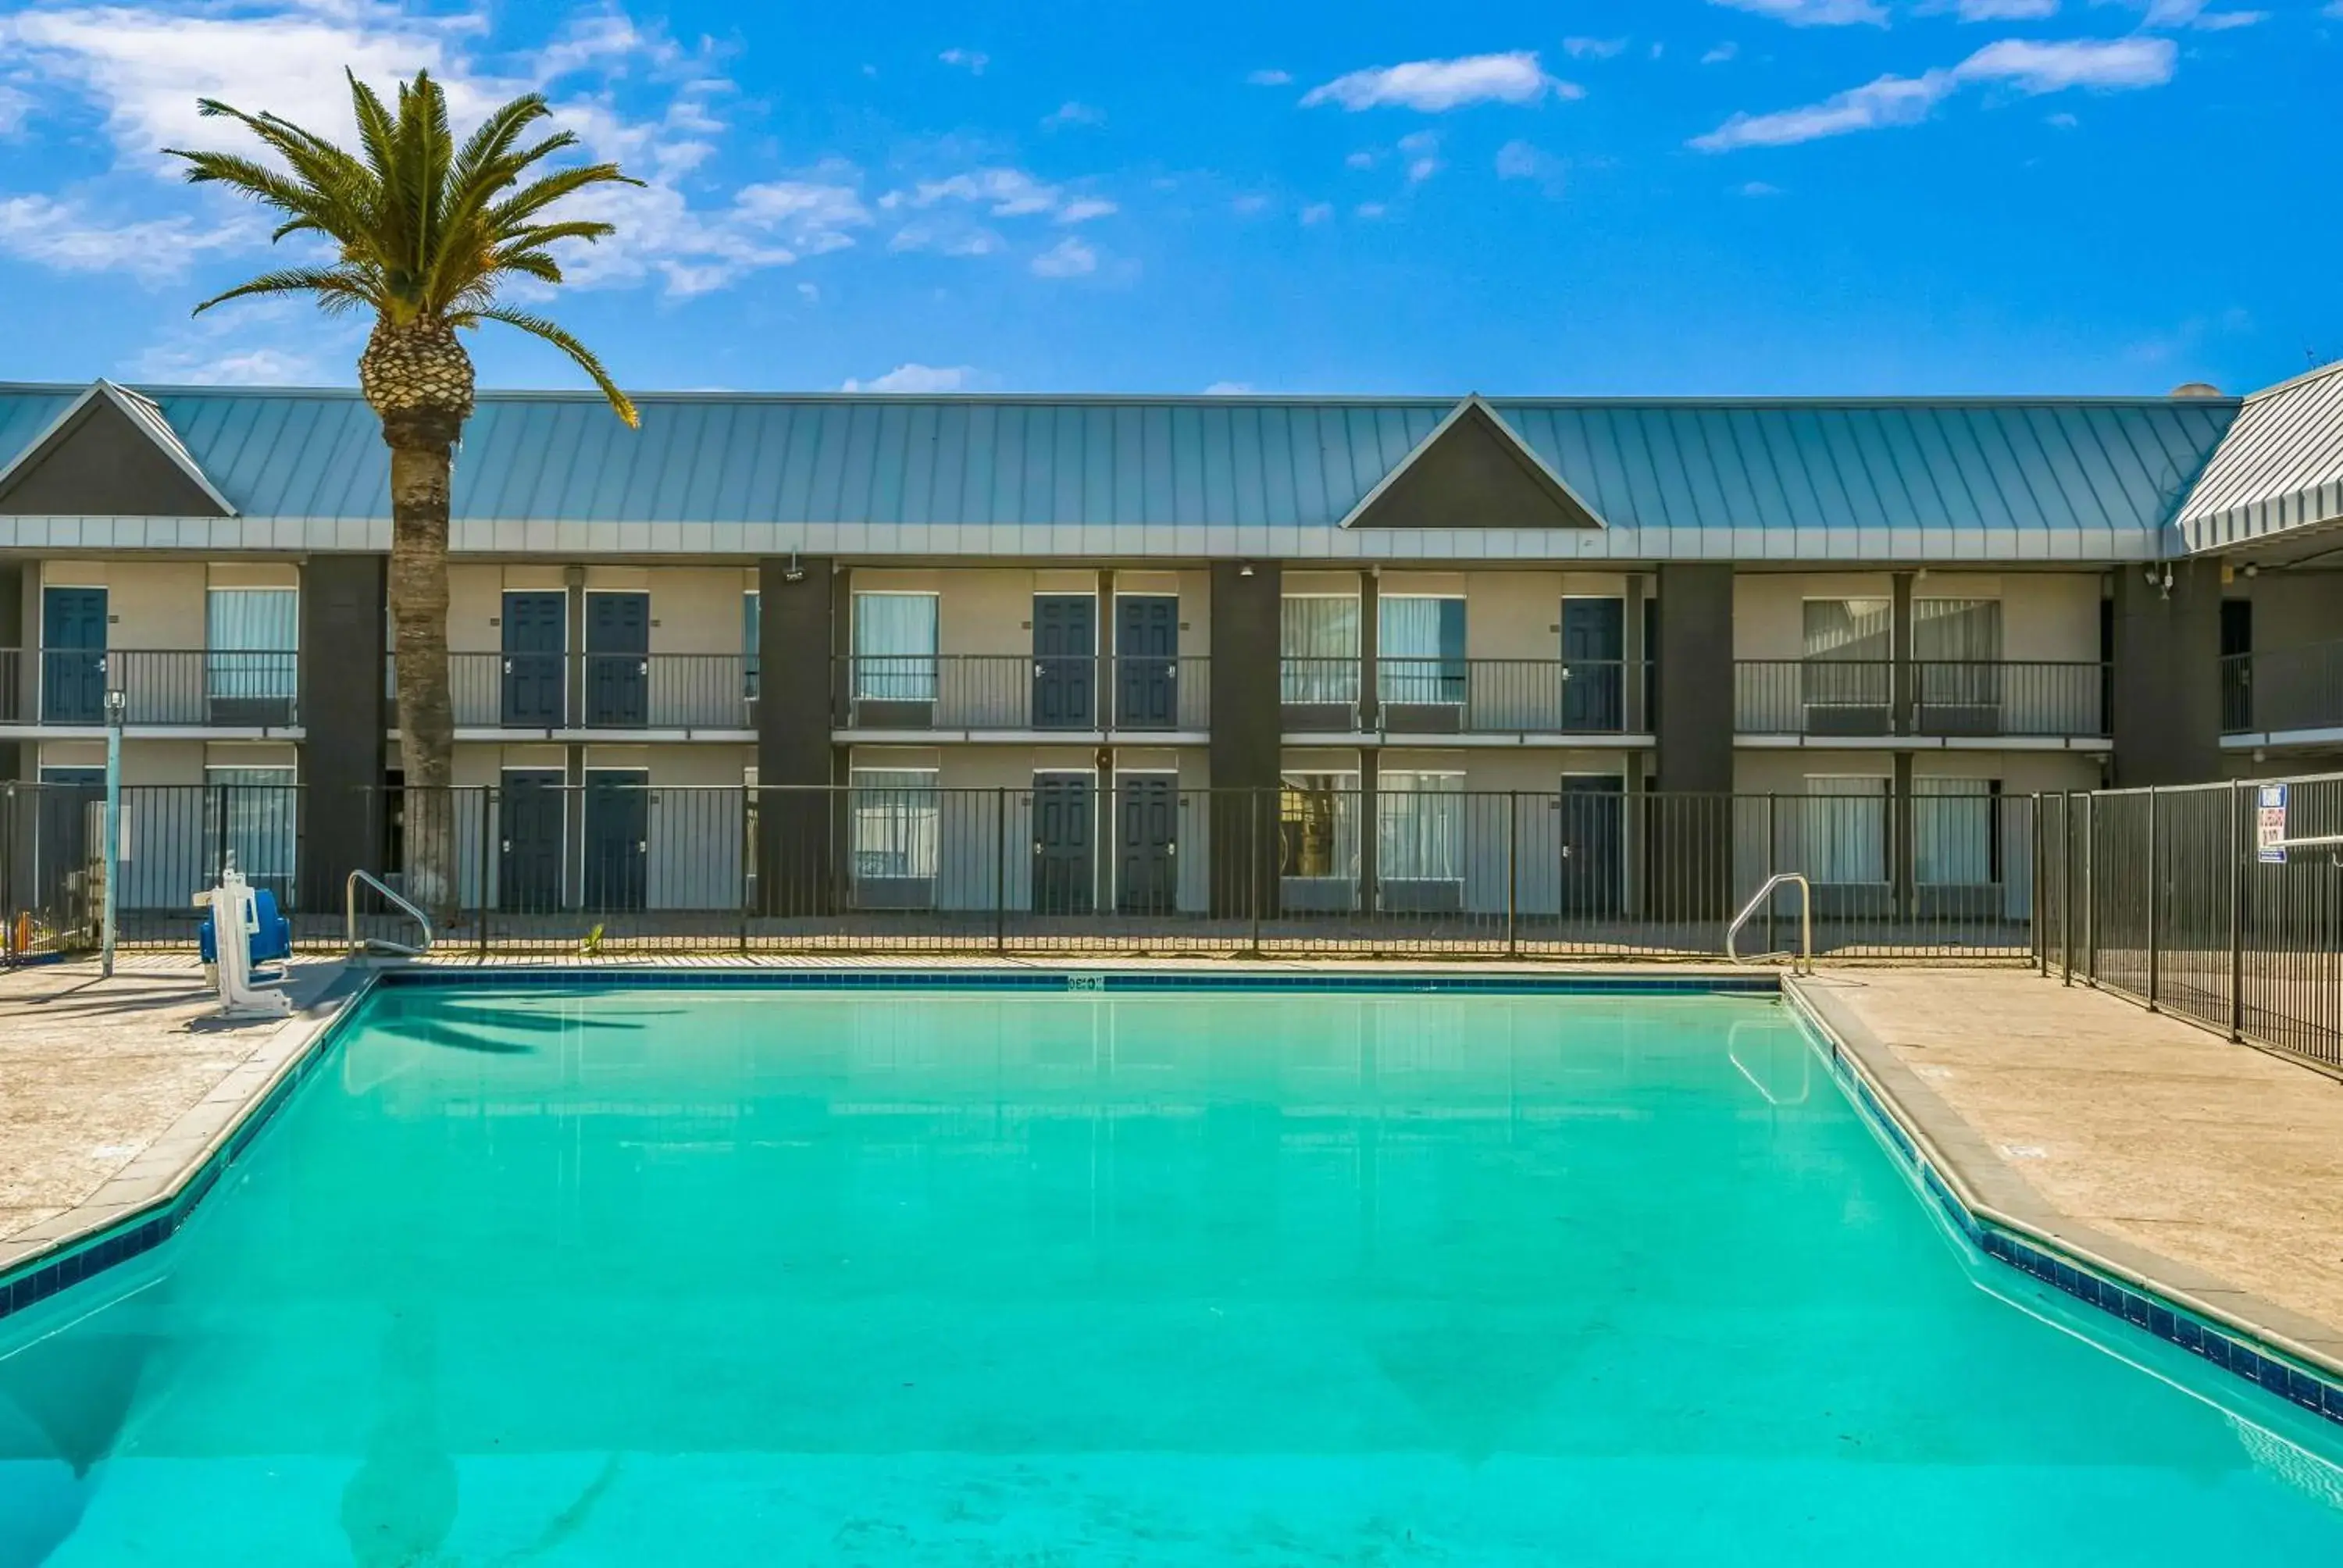 Property building, Swimming Pool in Motel 6-Tucson, AZ-Downtown